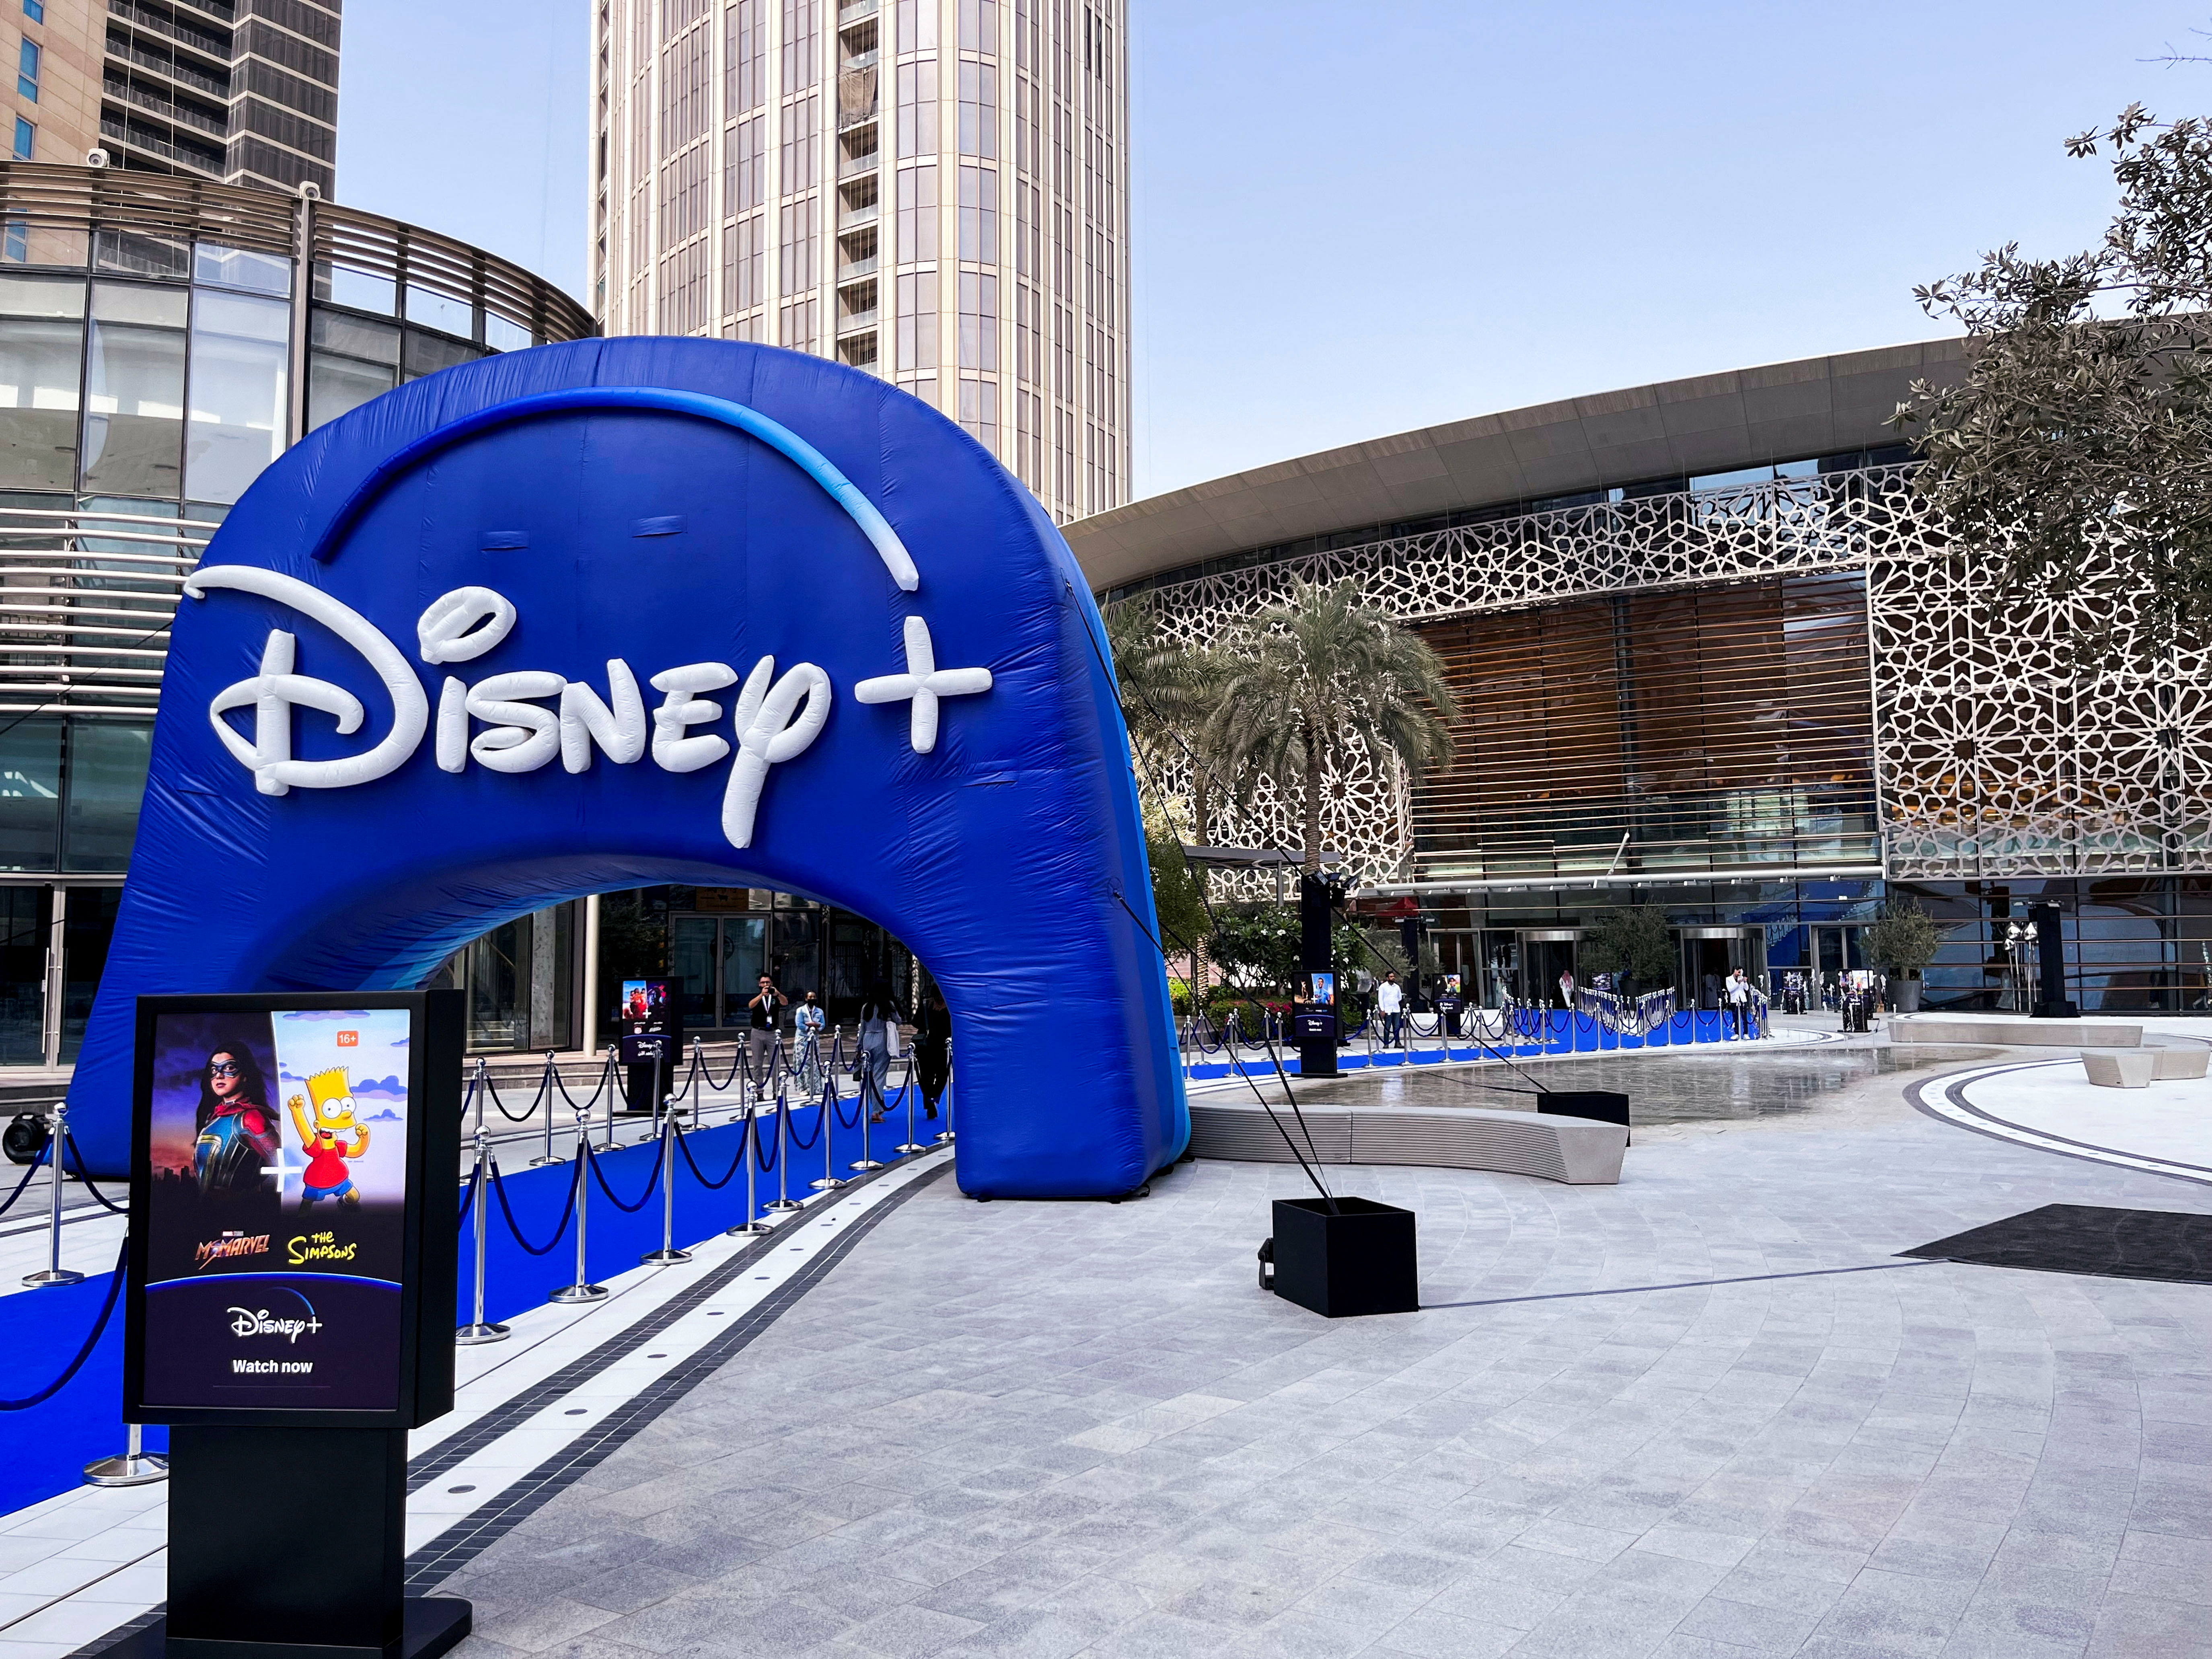 Disney+ Middle East entry heats up compeition for youthful region